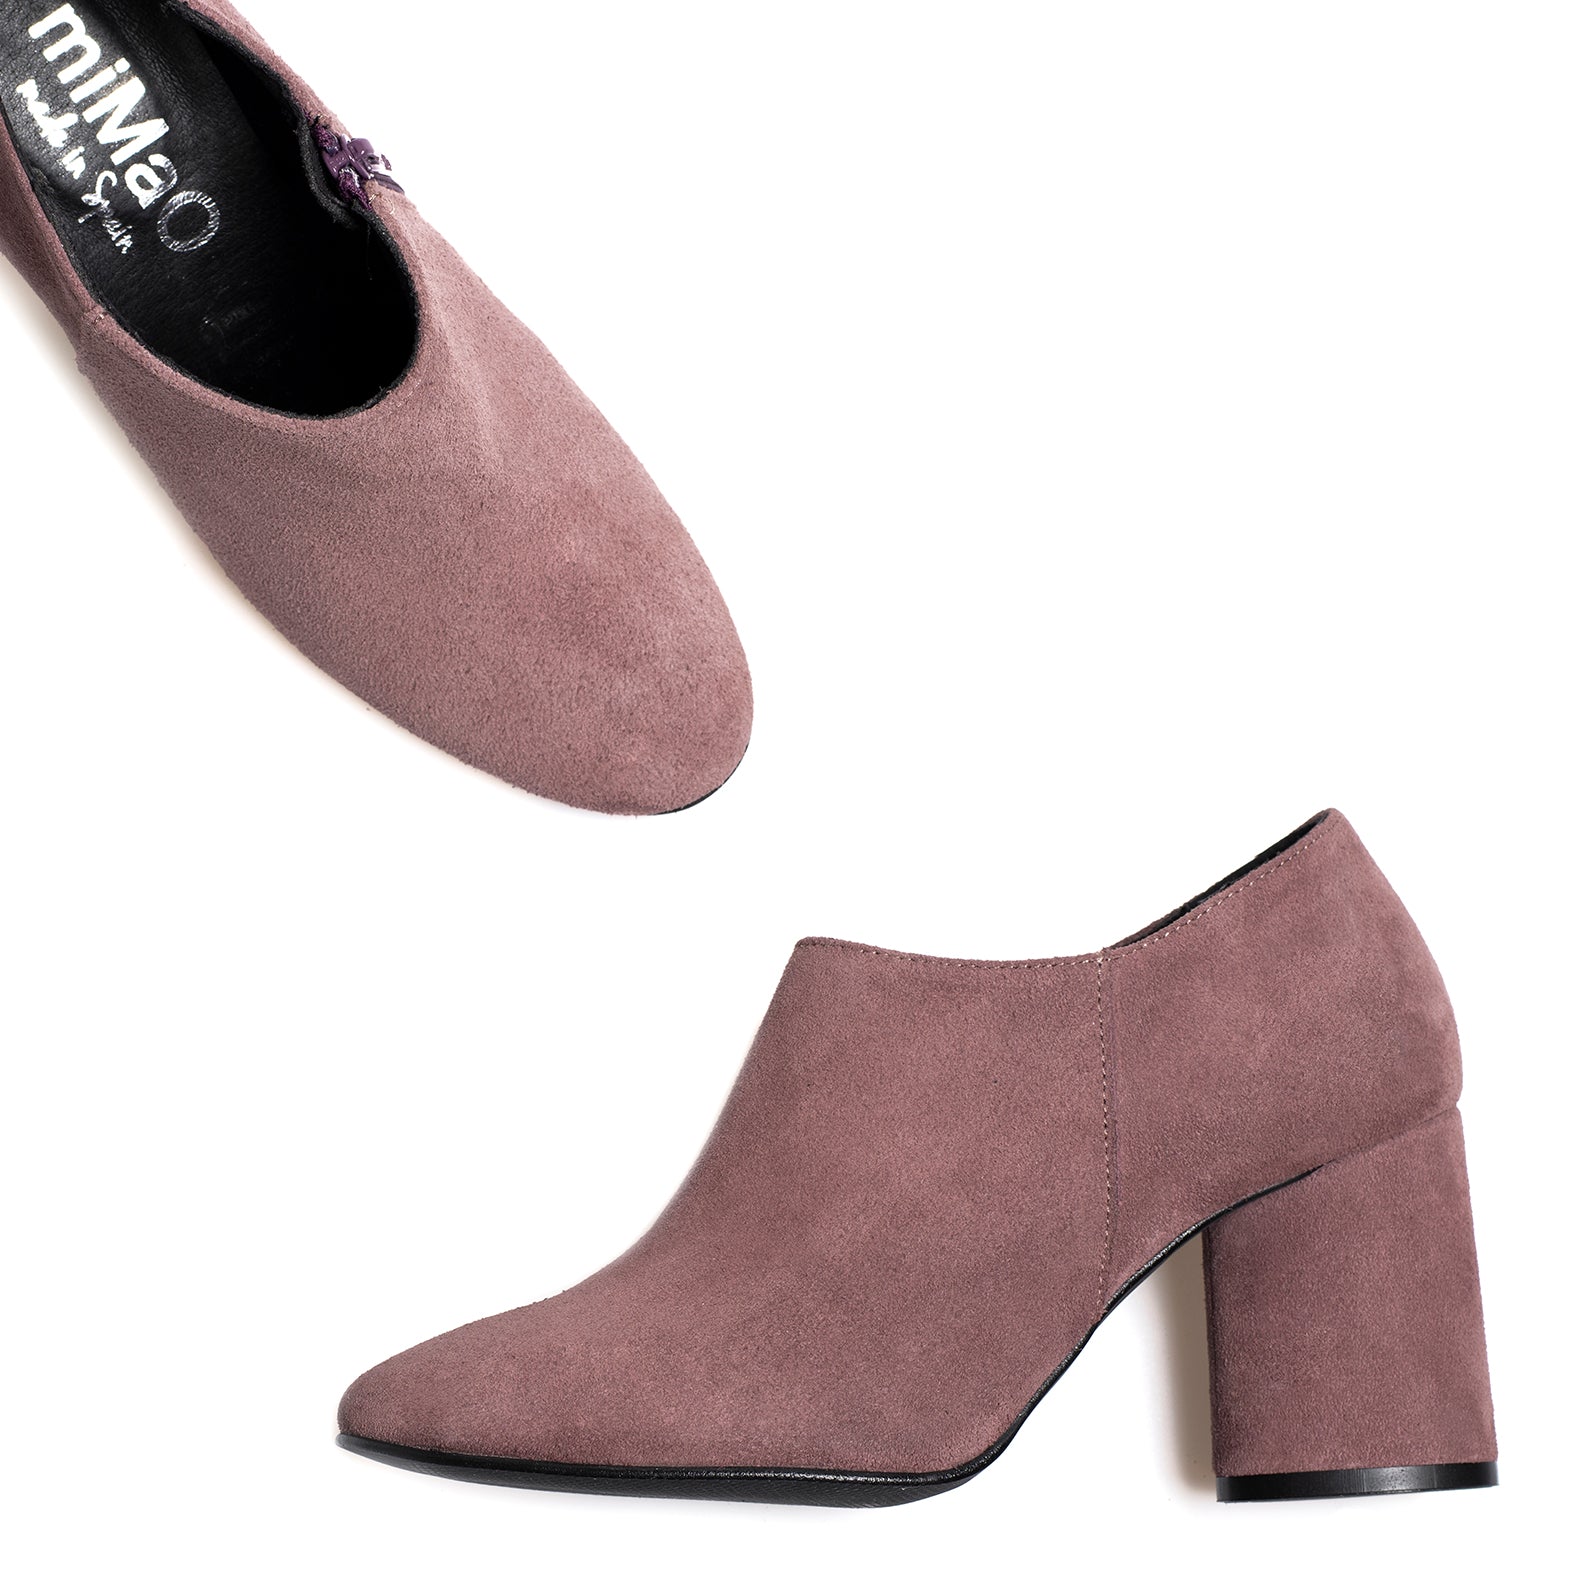 FASHION - LILAC block heel ankle boot